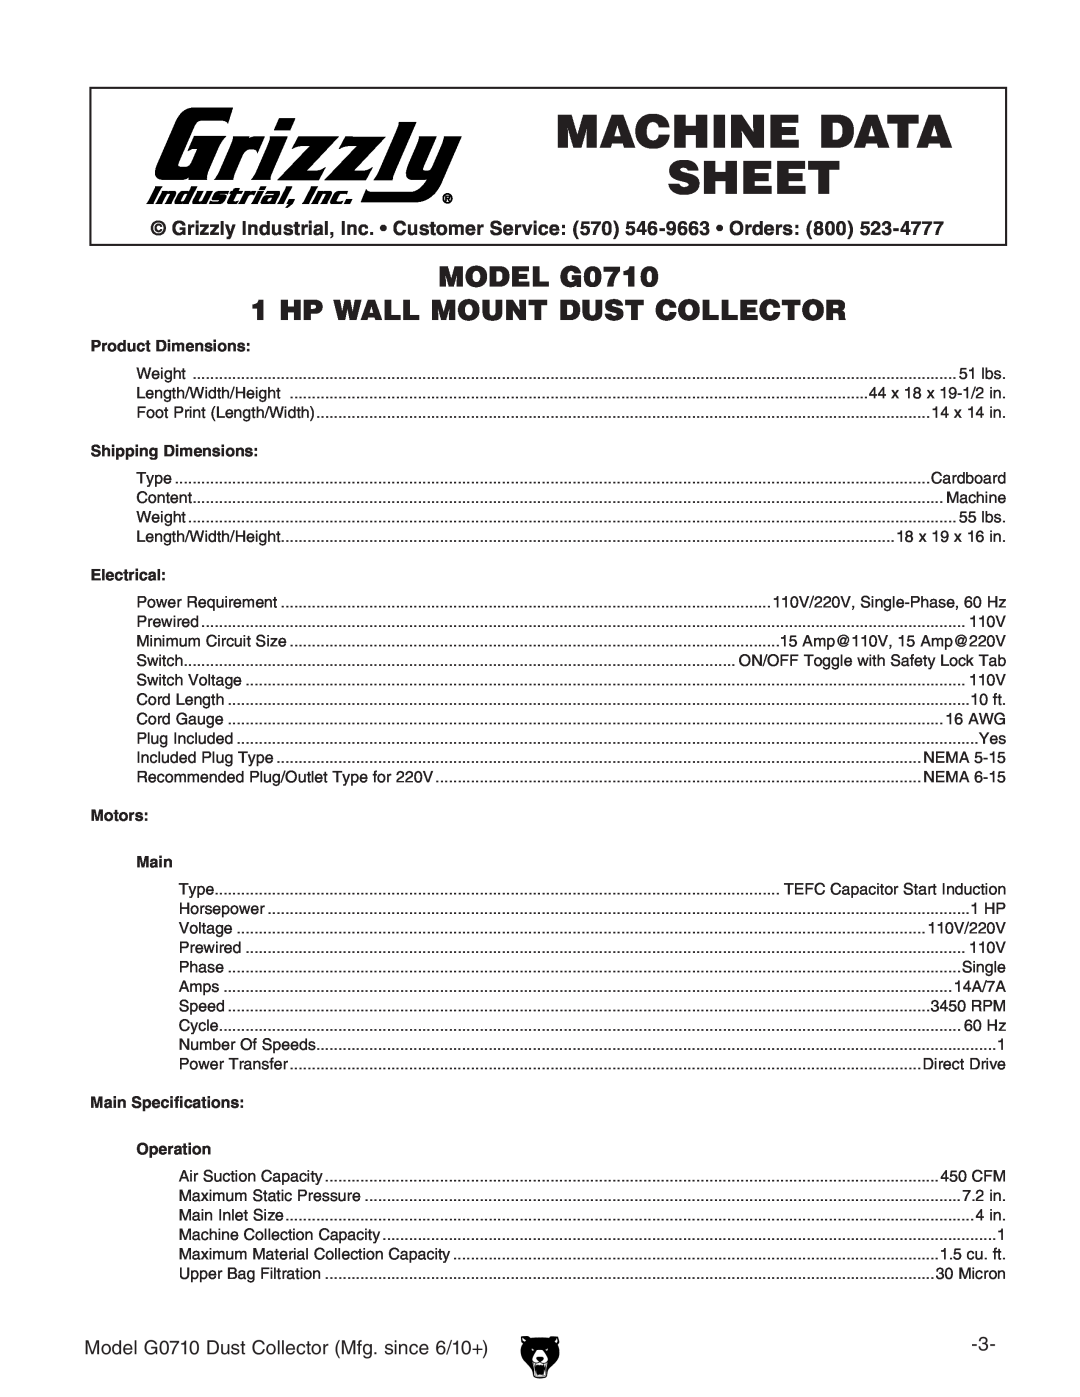 Grizzly G0710 mACHINe dATA SHeeT, Grizzly Industrial, Inc. Customer Service 570 546-9663 Orders 800, Machine Data Sheet 